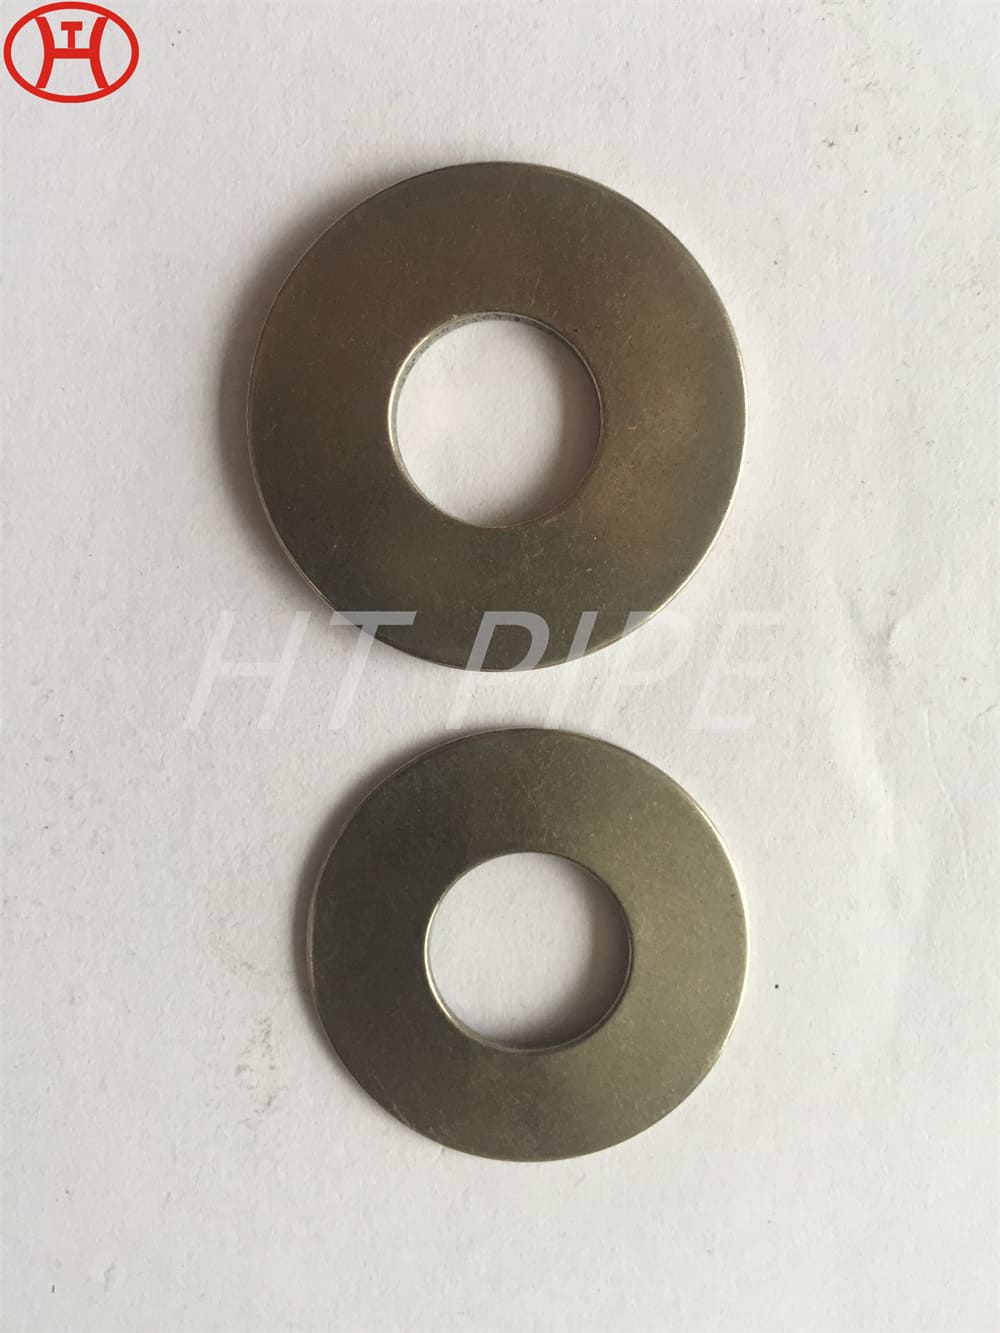 GH80A Nimonic 80A all washer For Pipe Flange DIN125 Plain Washer